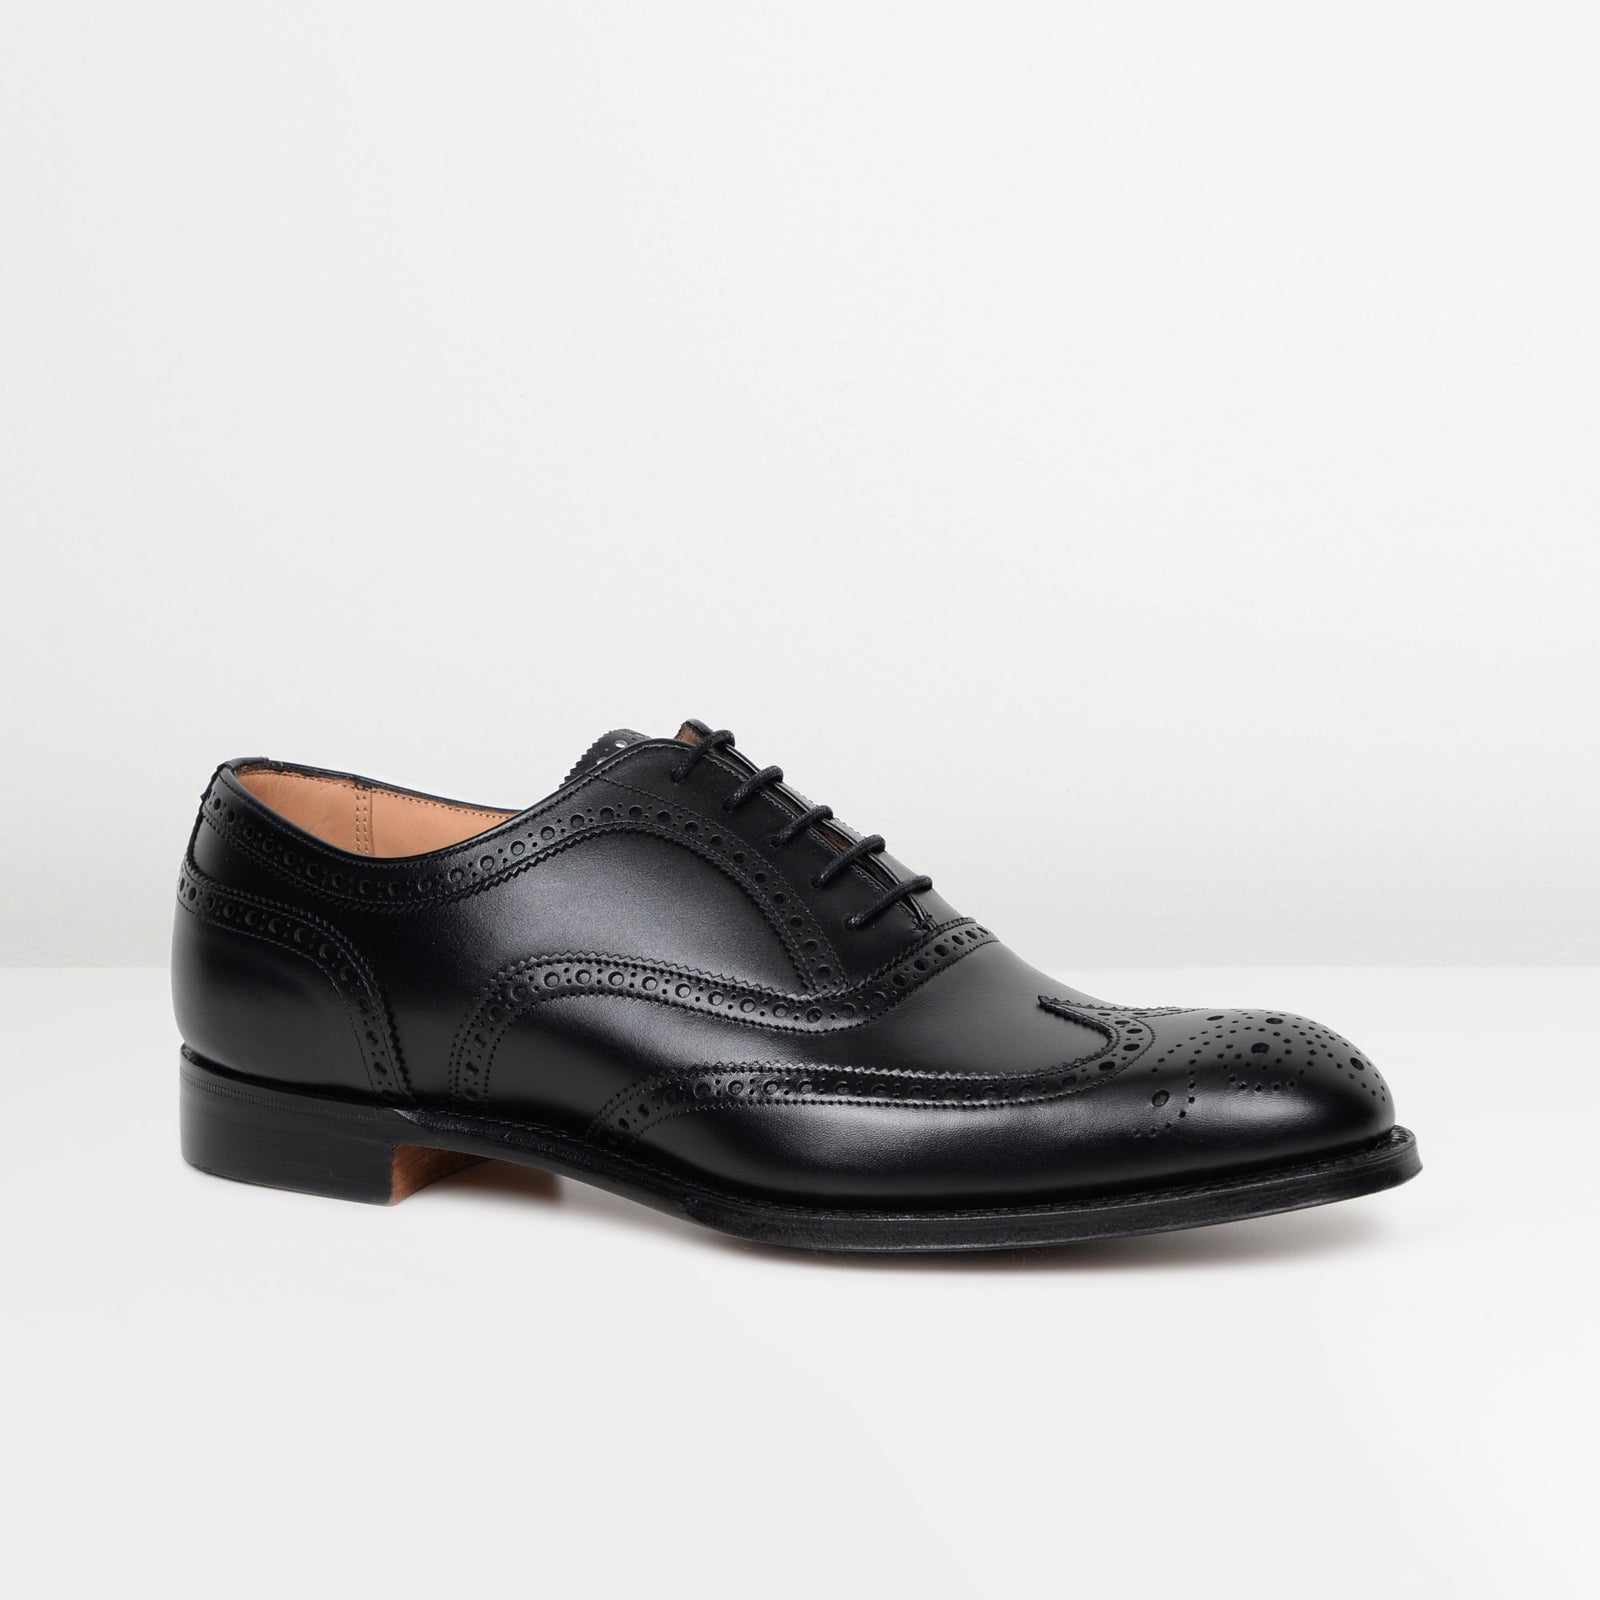 Black Arthur III Cheaney Oxford Brogues from Quarter & Last